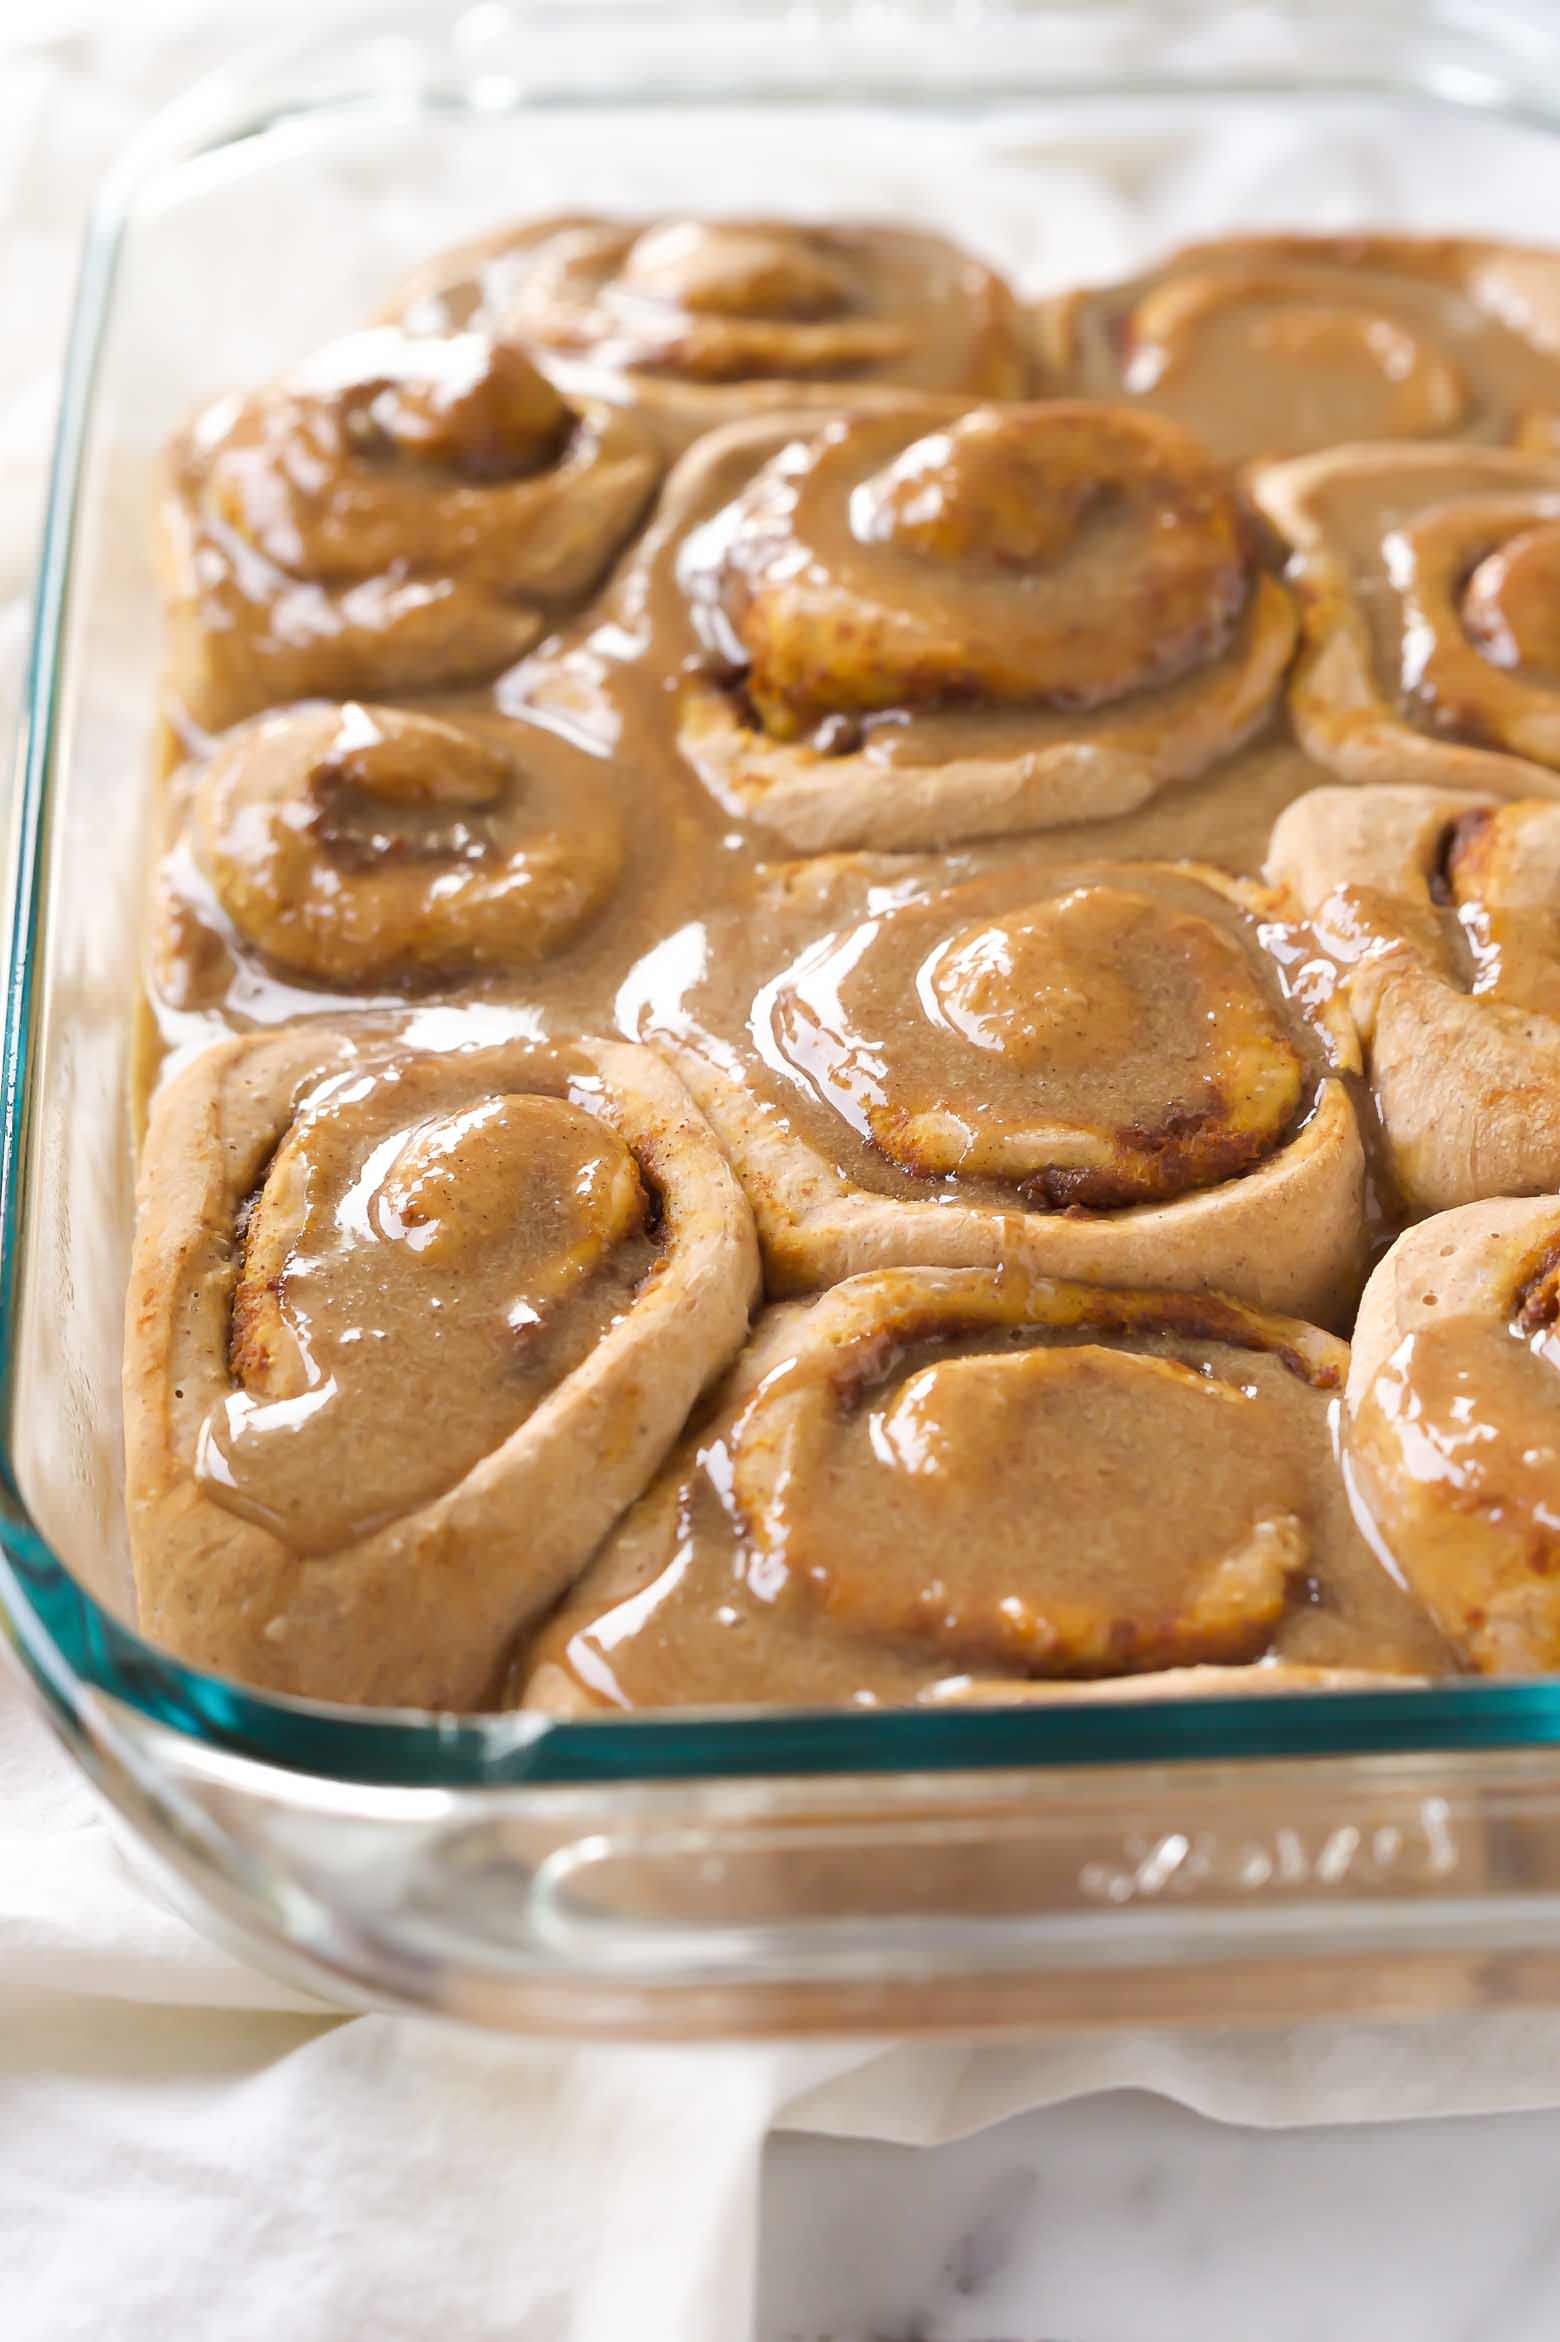 These Pumpkin Cake Mix Cinnamon Rolls are made easier by starting with a cake mix then drizzled in a delicious brown sugar maple glaze! Your family will love waking up to these!